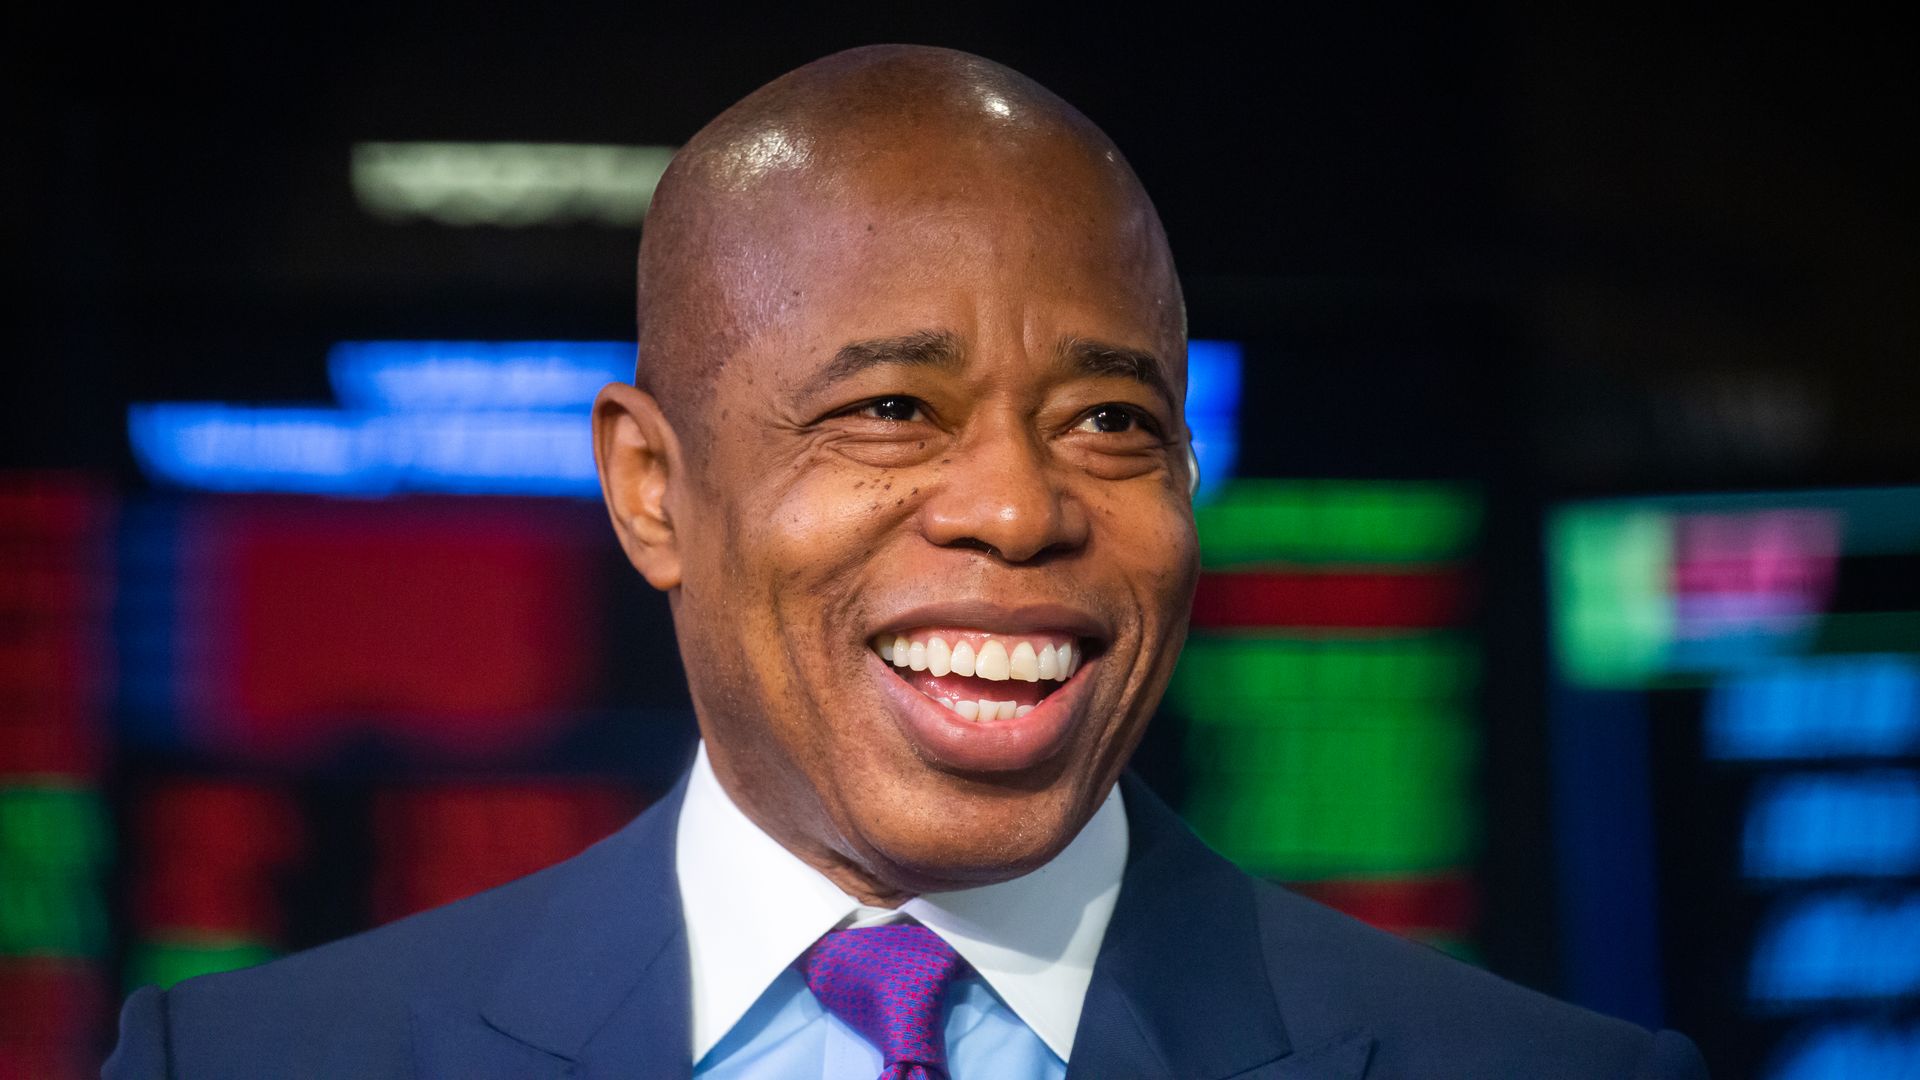 Eric Adams, mayor of New York, speaks during an interview on the floor of the New York Stock Exchange (NYSE) in New York, U.S., on Monday, Feb. 28, 2022. 